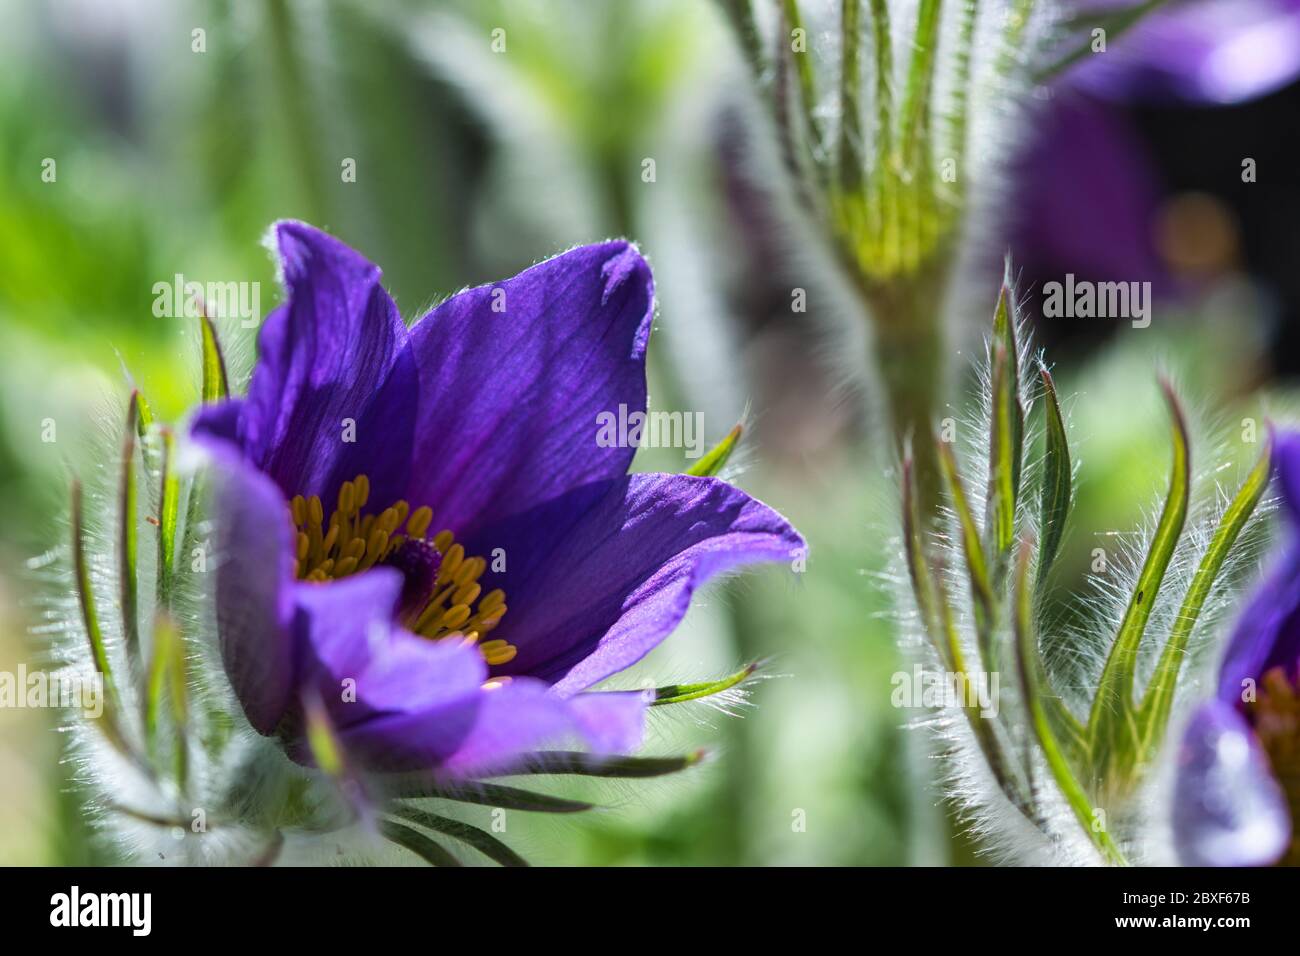 Purple soft and hairy pulsatilla pasqueflower bell shaped sepals close up in the rays of setting sun in the early spring garden Stock Photo